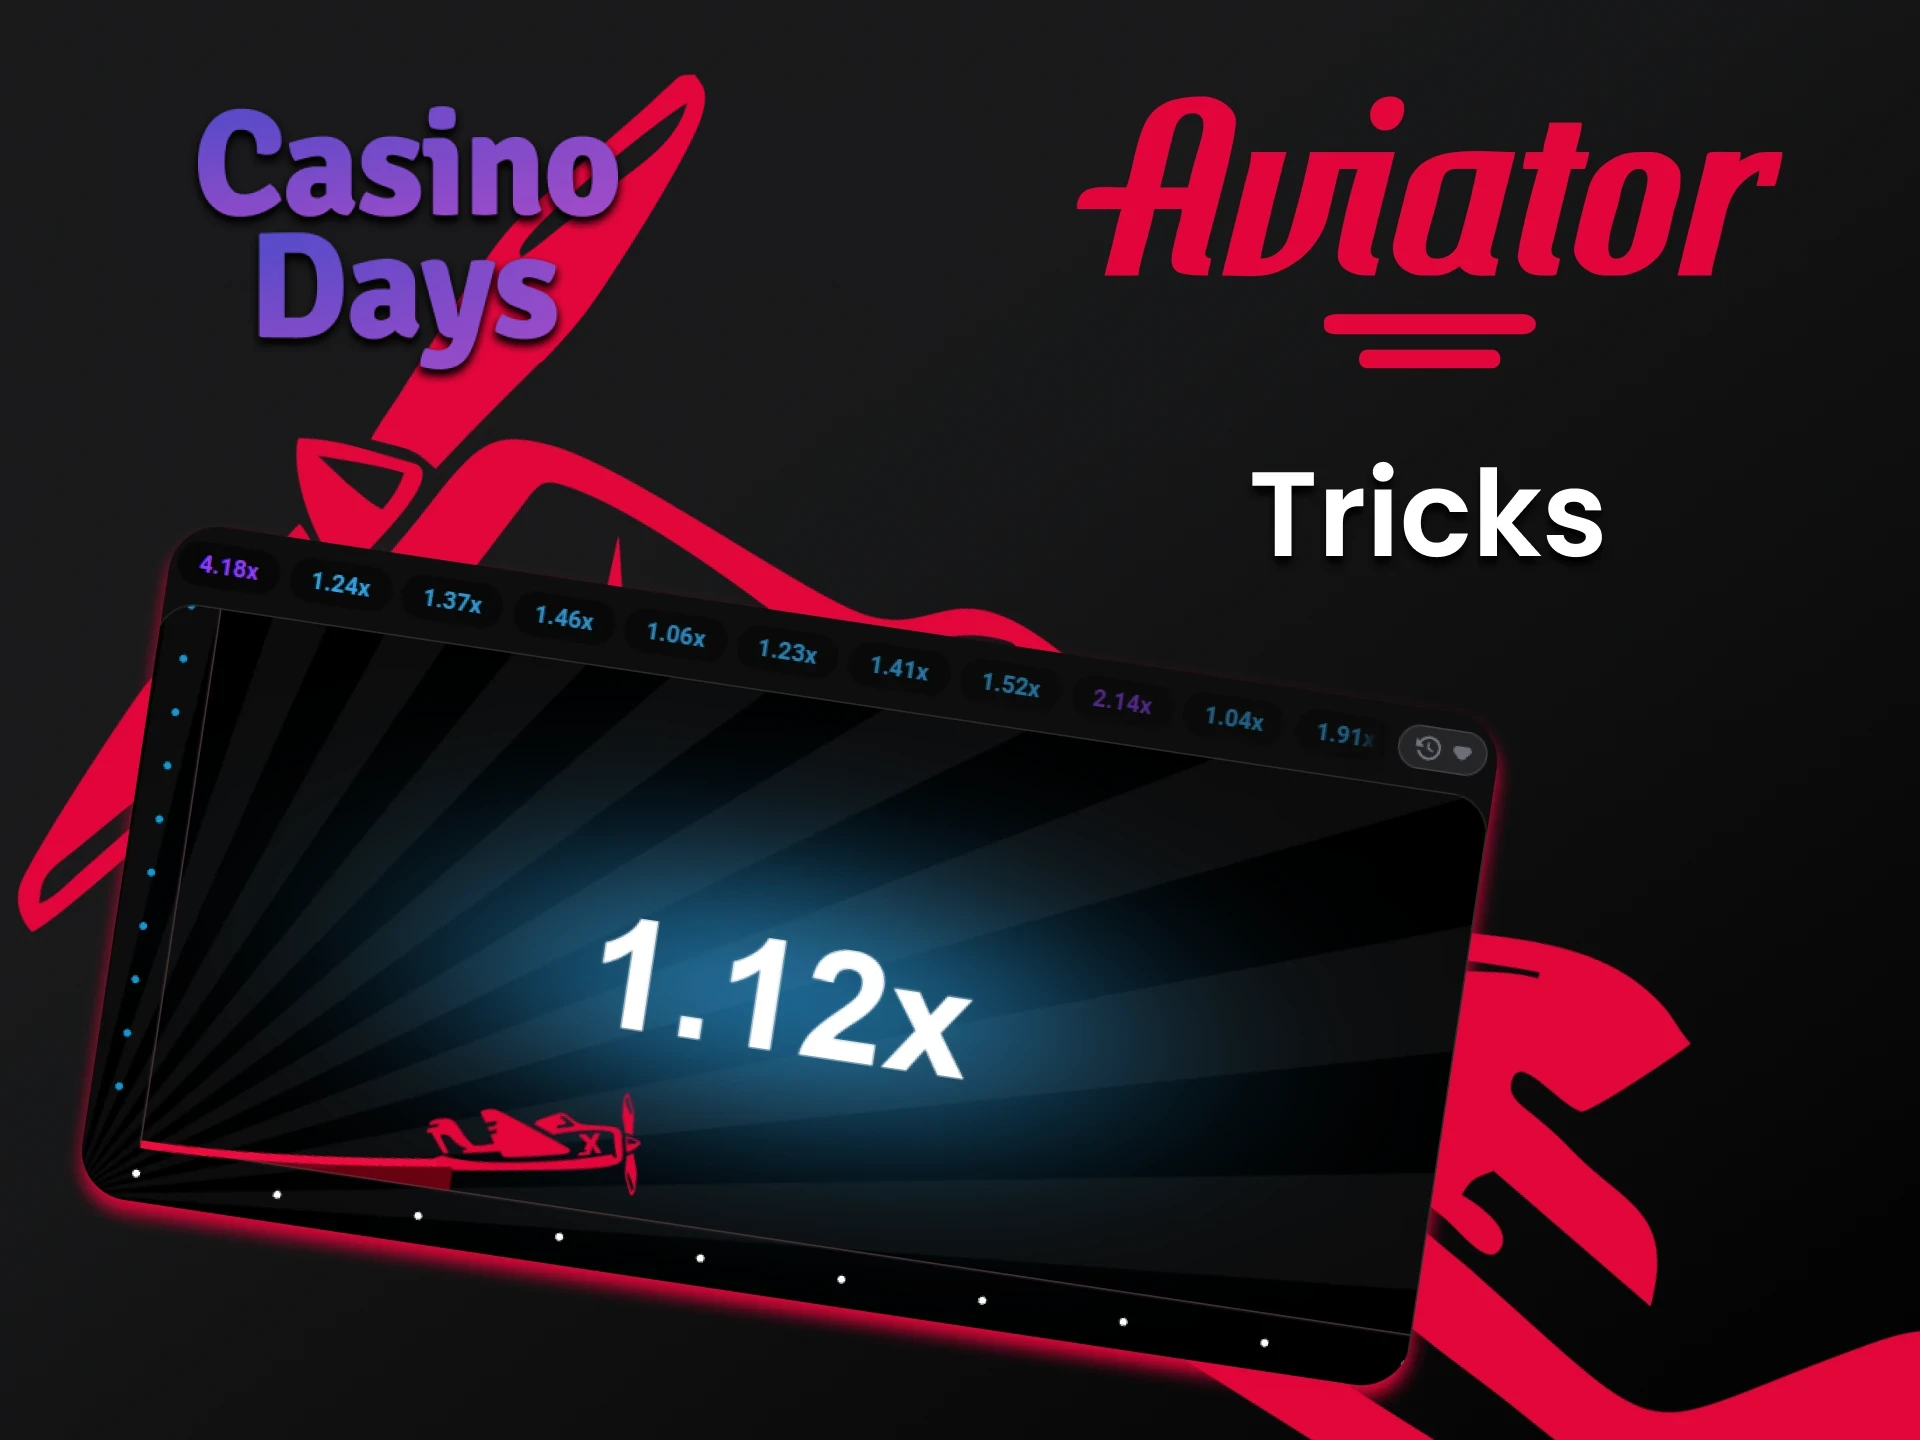 Learn the tricks to win at Aviator at Casino Days.